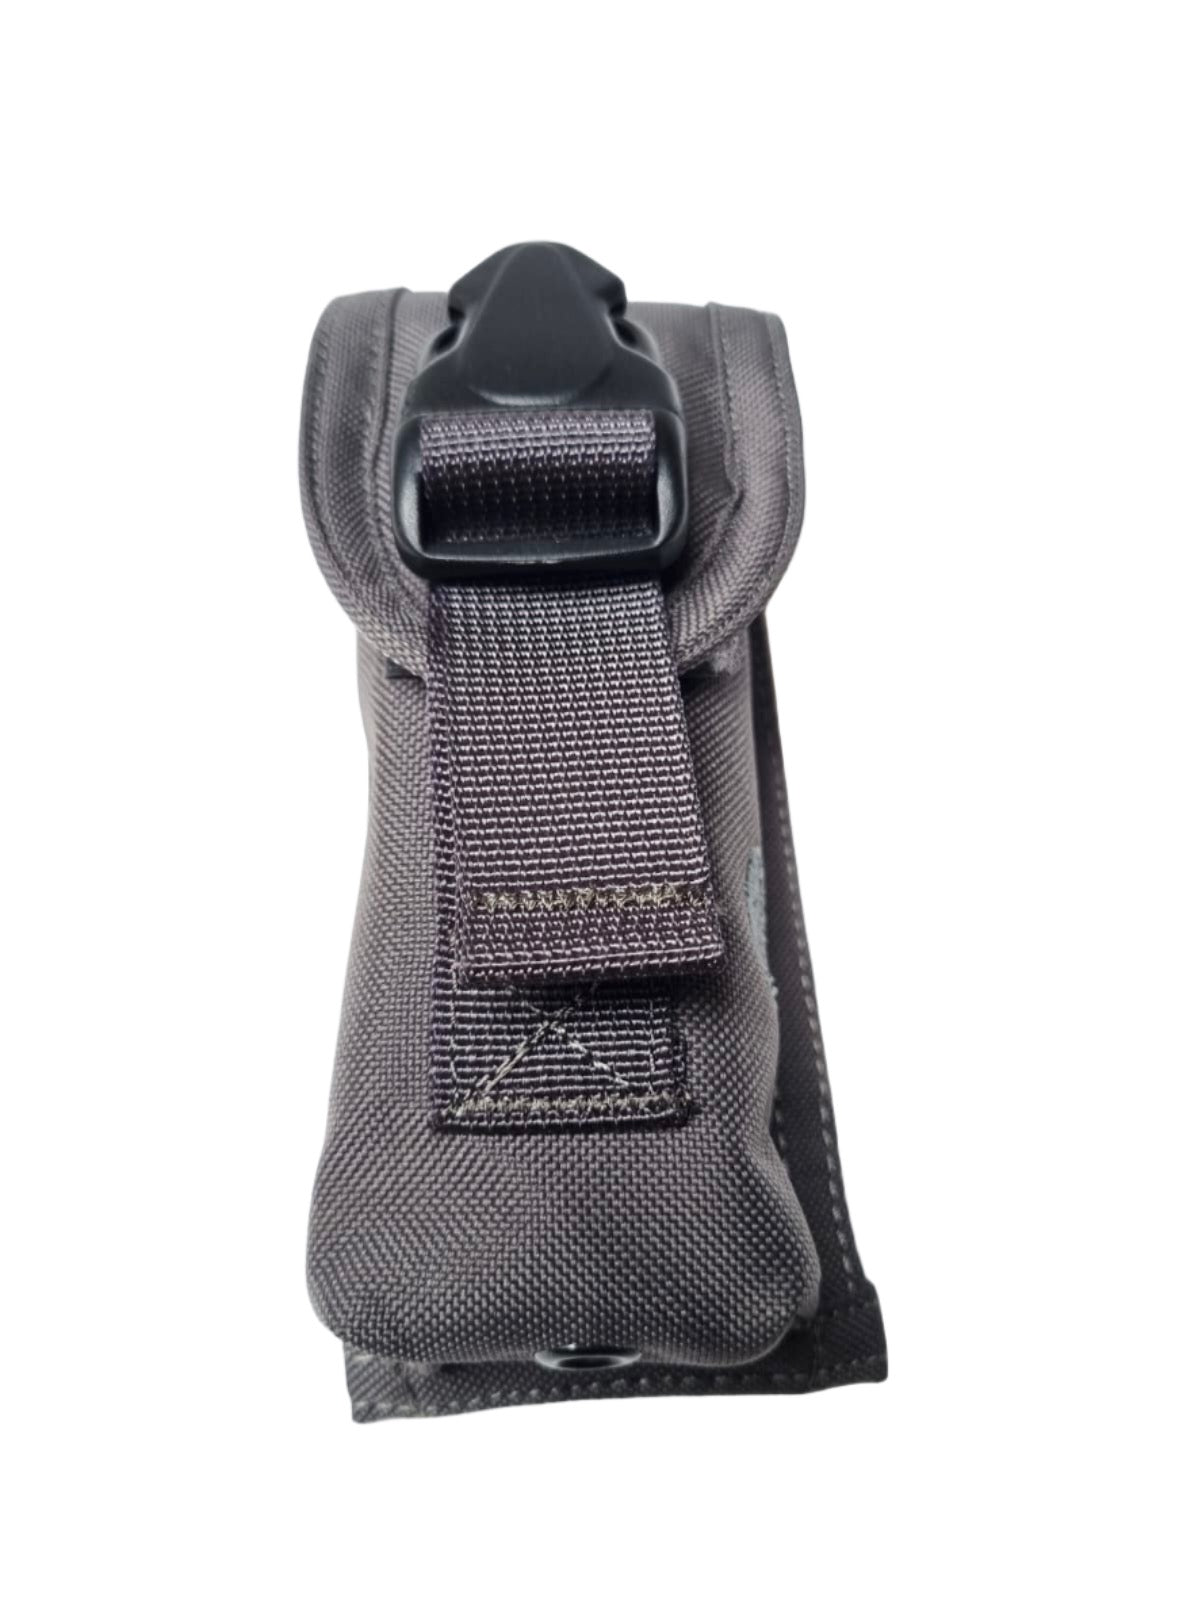 SHE-1037 FLASHLIGHT POUCH GREY FRONT